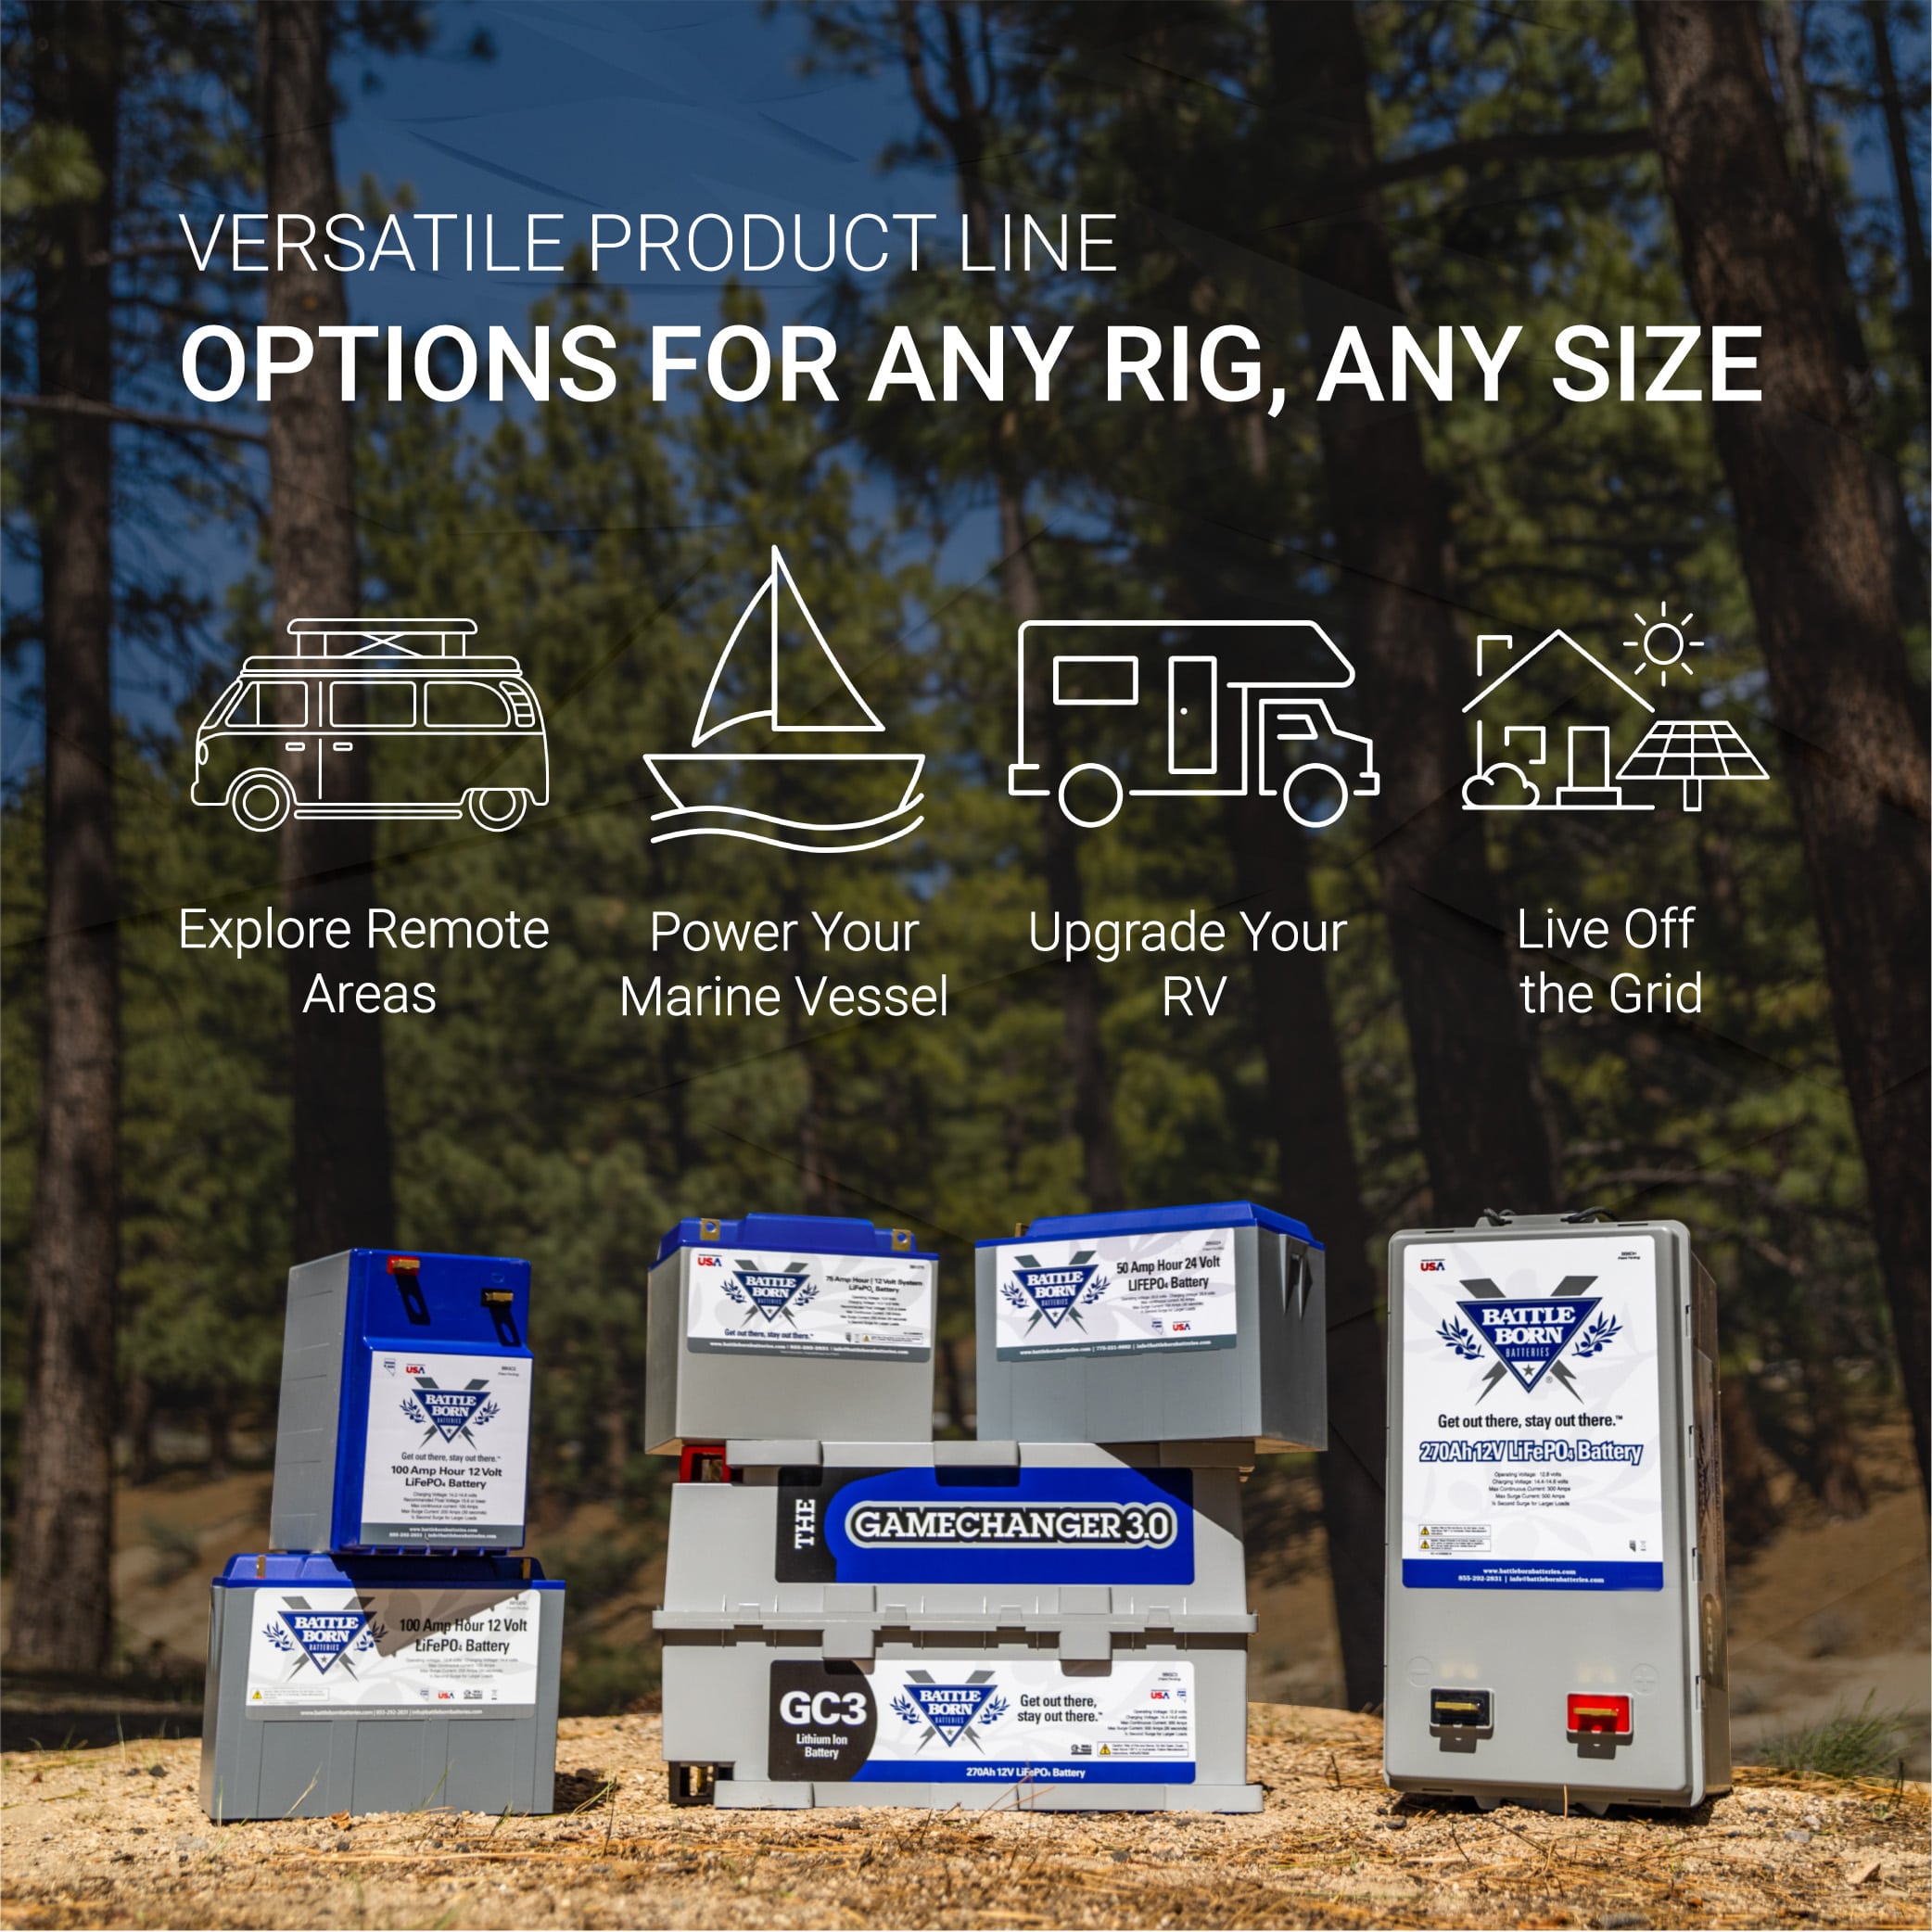 battle born batteries has a versatile product line of lithium ion batteries for exploring remote areas, powering marine vessels, upgrading rv power systems and living off the grid